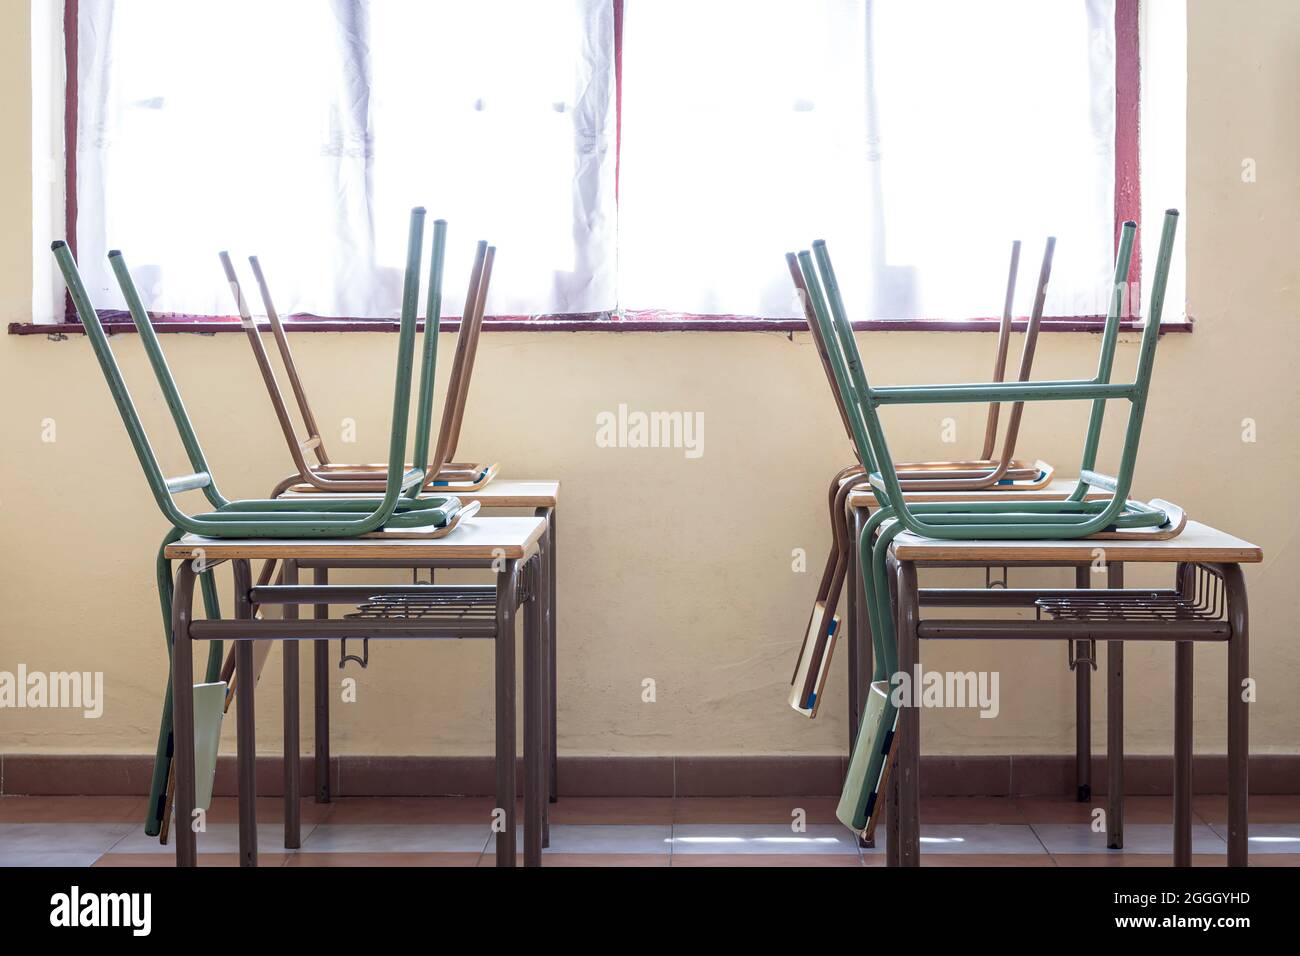 Photograph of children's chairs on the desks of a nursery school.The photo is taken in horizontal format. Stock Photo